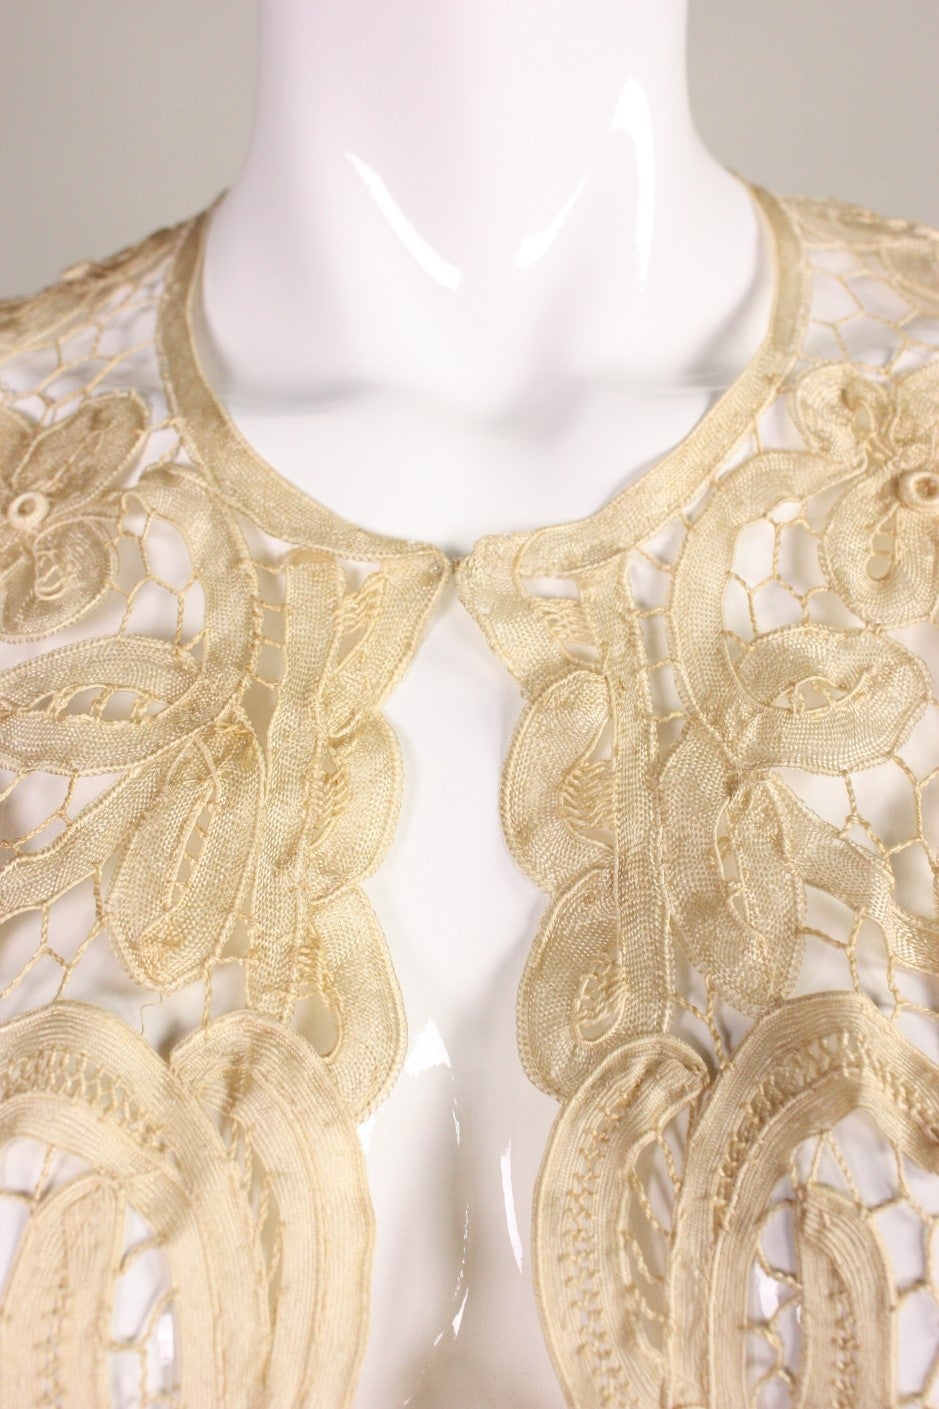 Edwardian Battenburg Lace Capelet In Excellent Condition For Sale In Los Angeles, CA